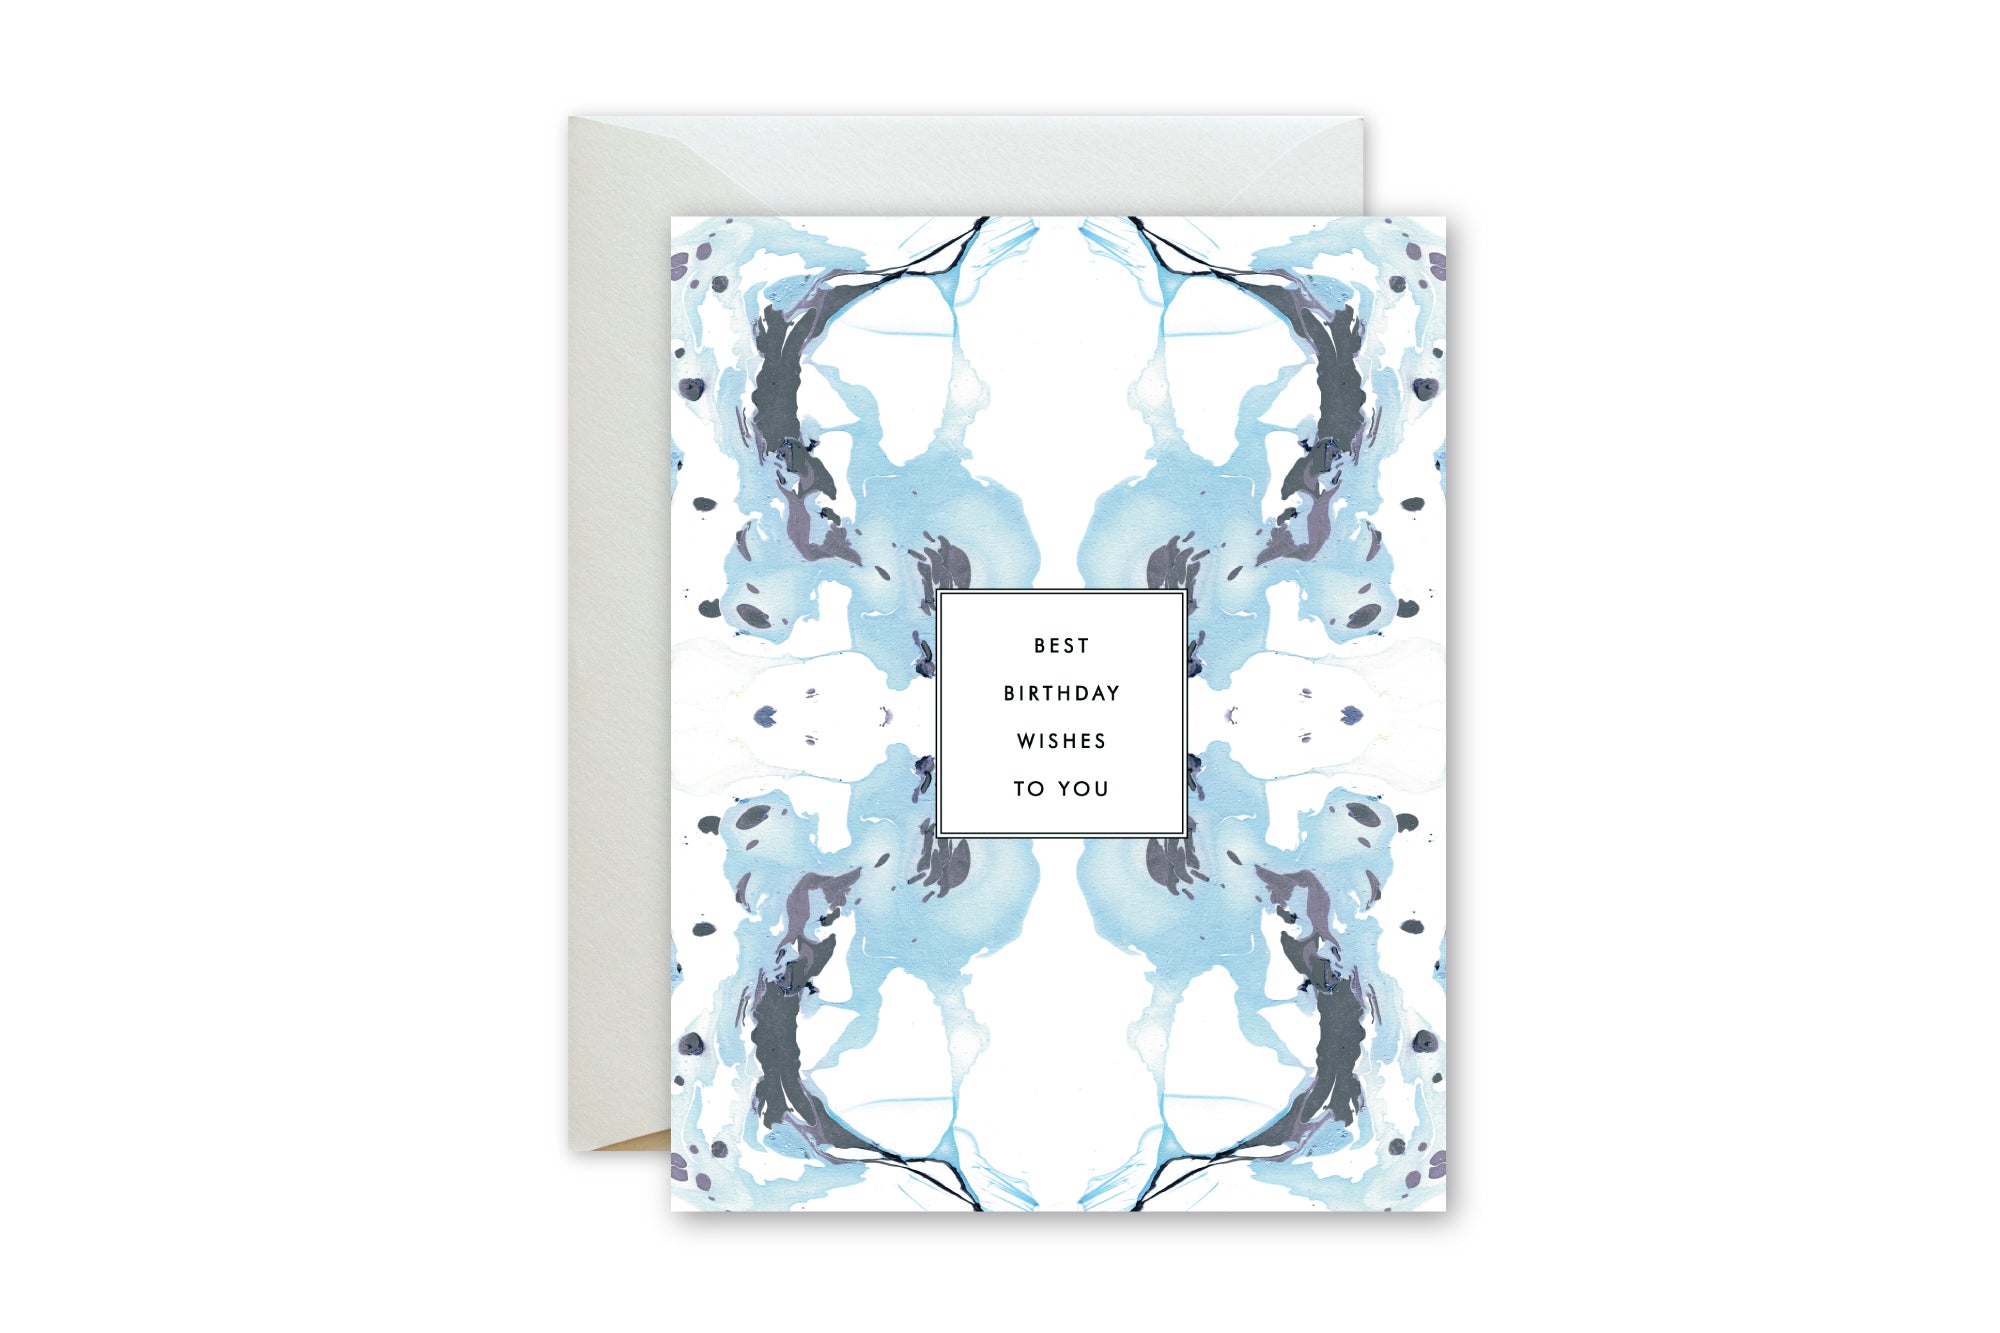 BEST BIRTHDAY WISHES Tiled Grey Blue Marble Card